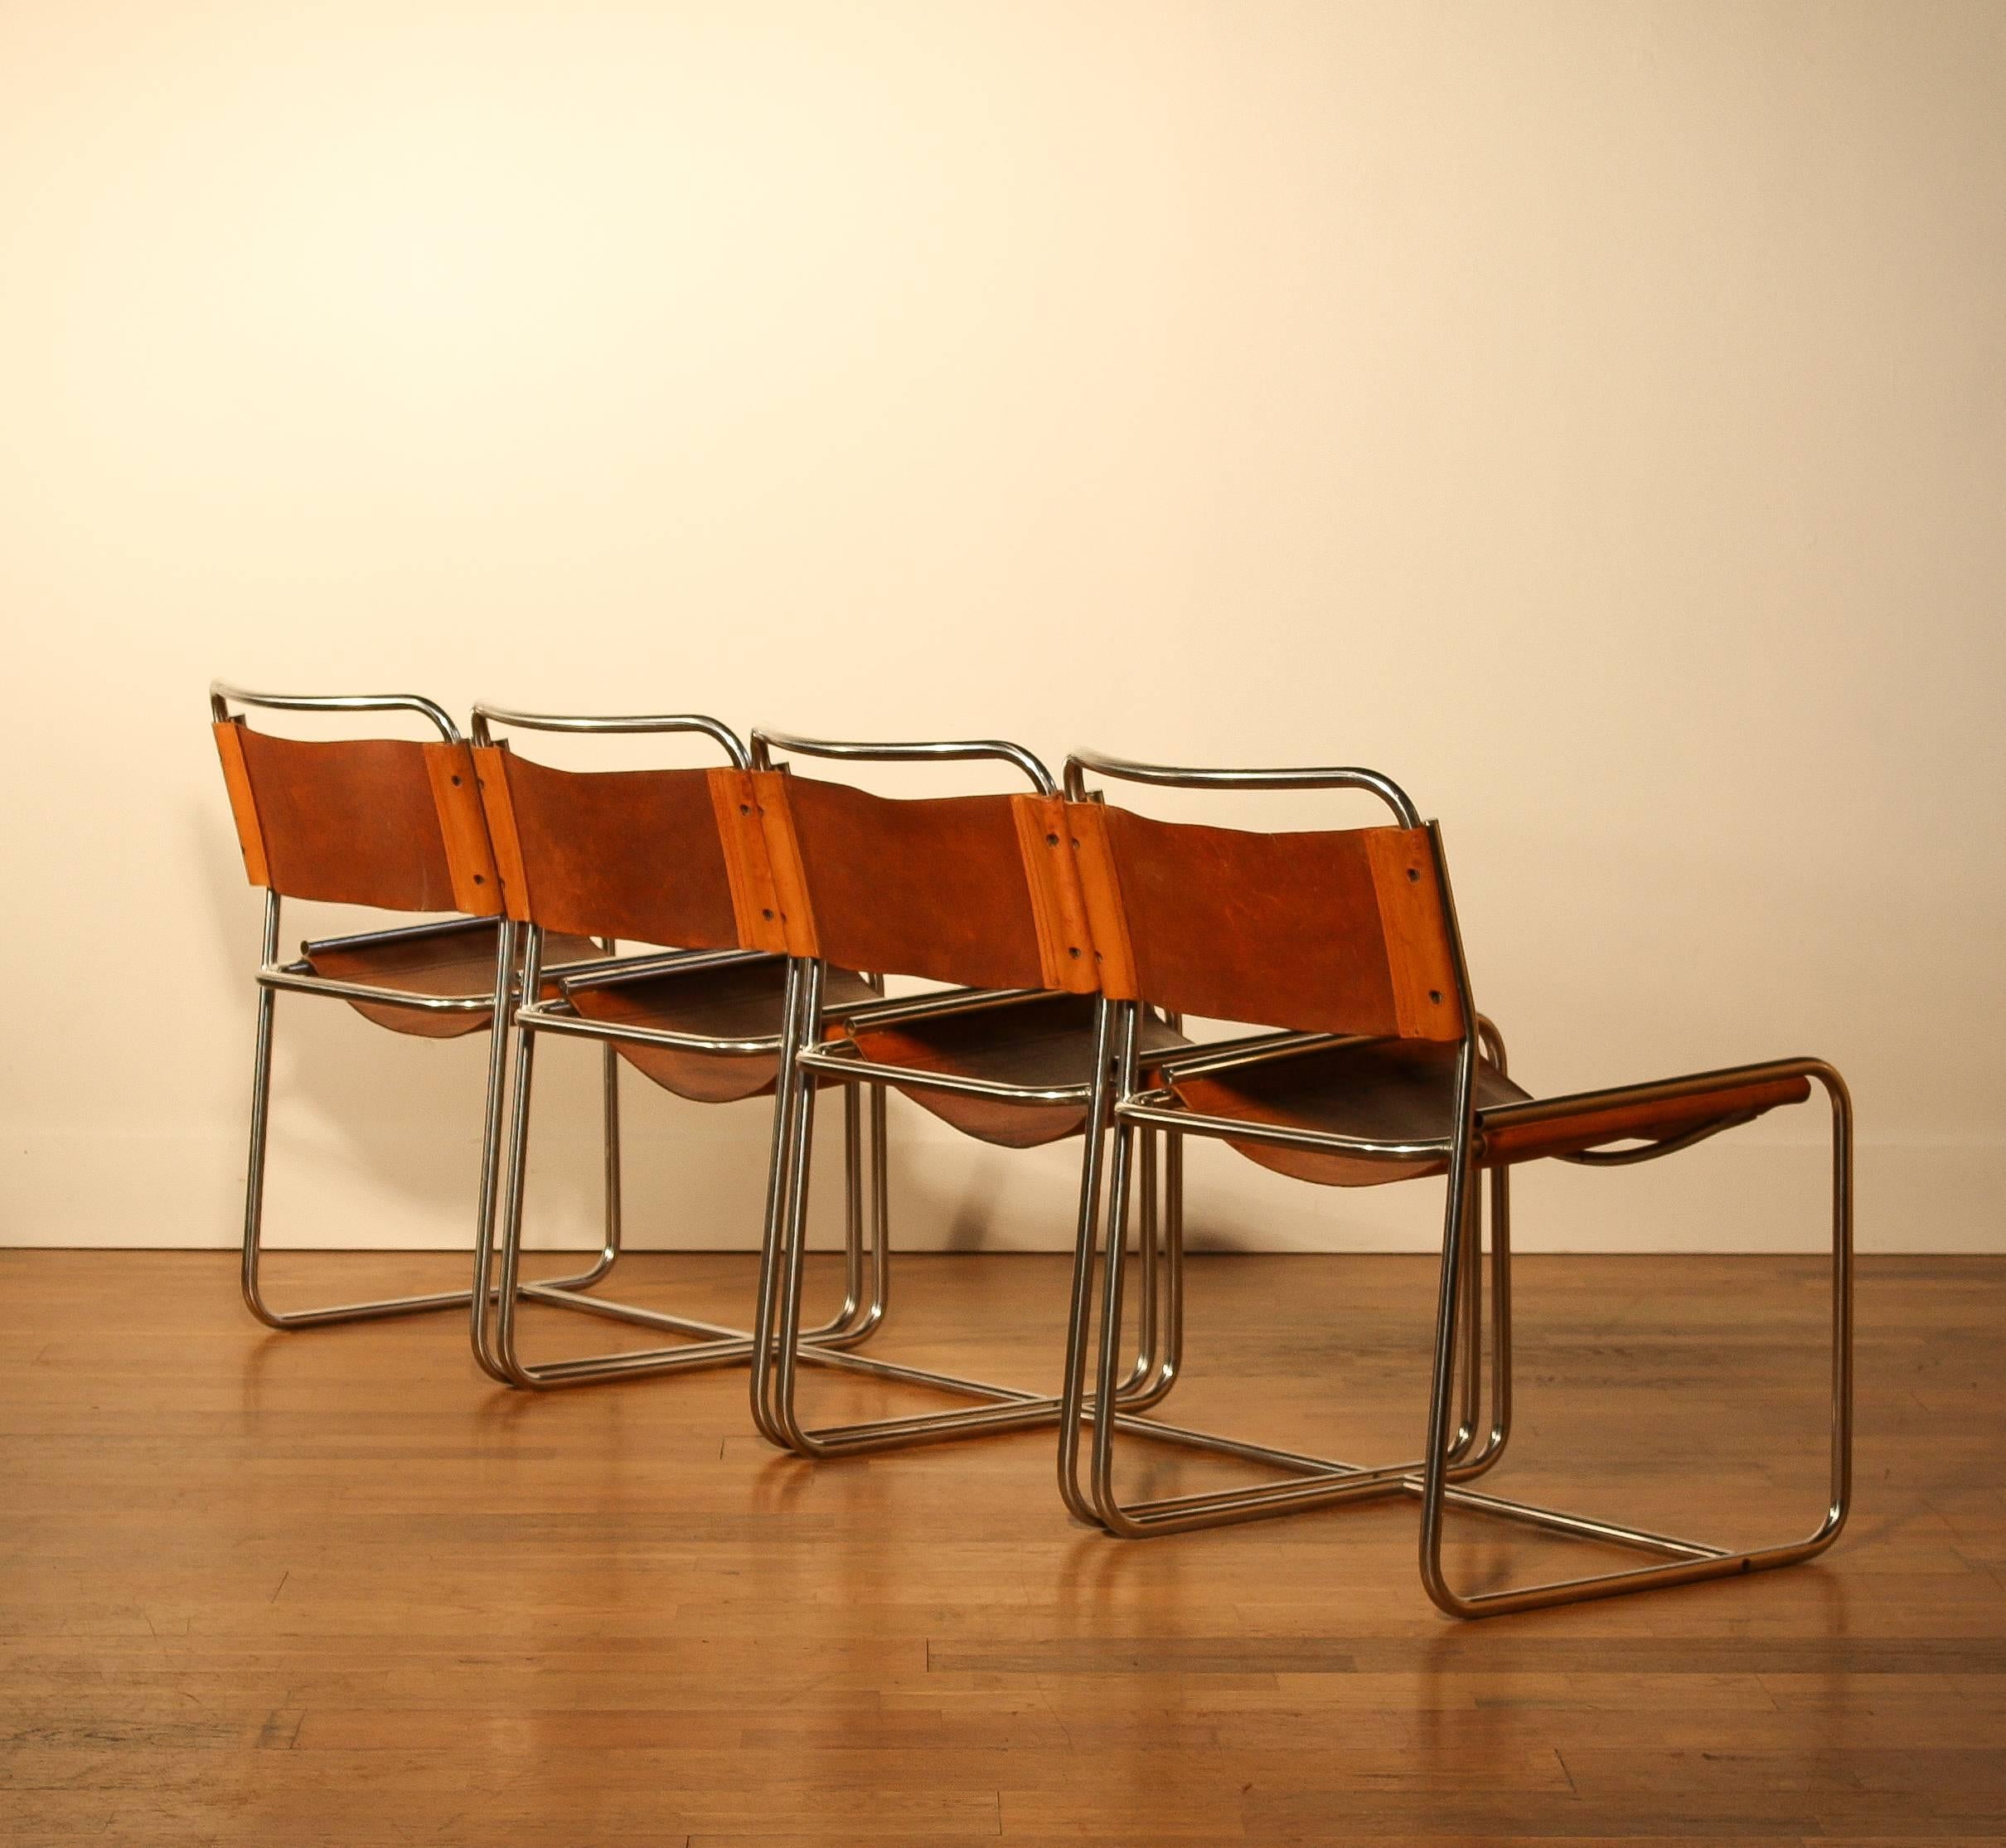  1970s Set of Four Dining Chairs by Paul Ibens & Clair Bataille for 't Spectrum 1